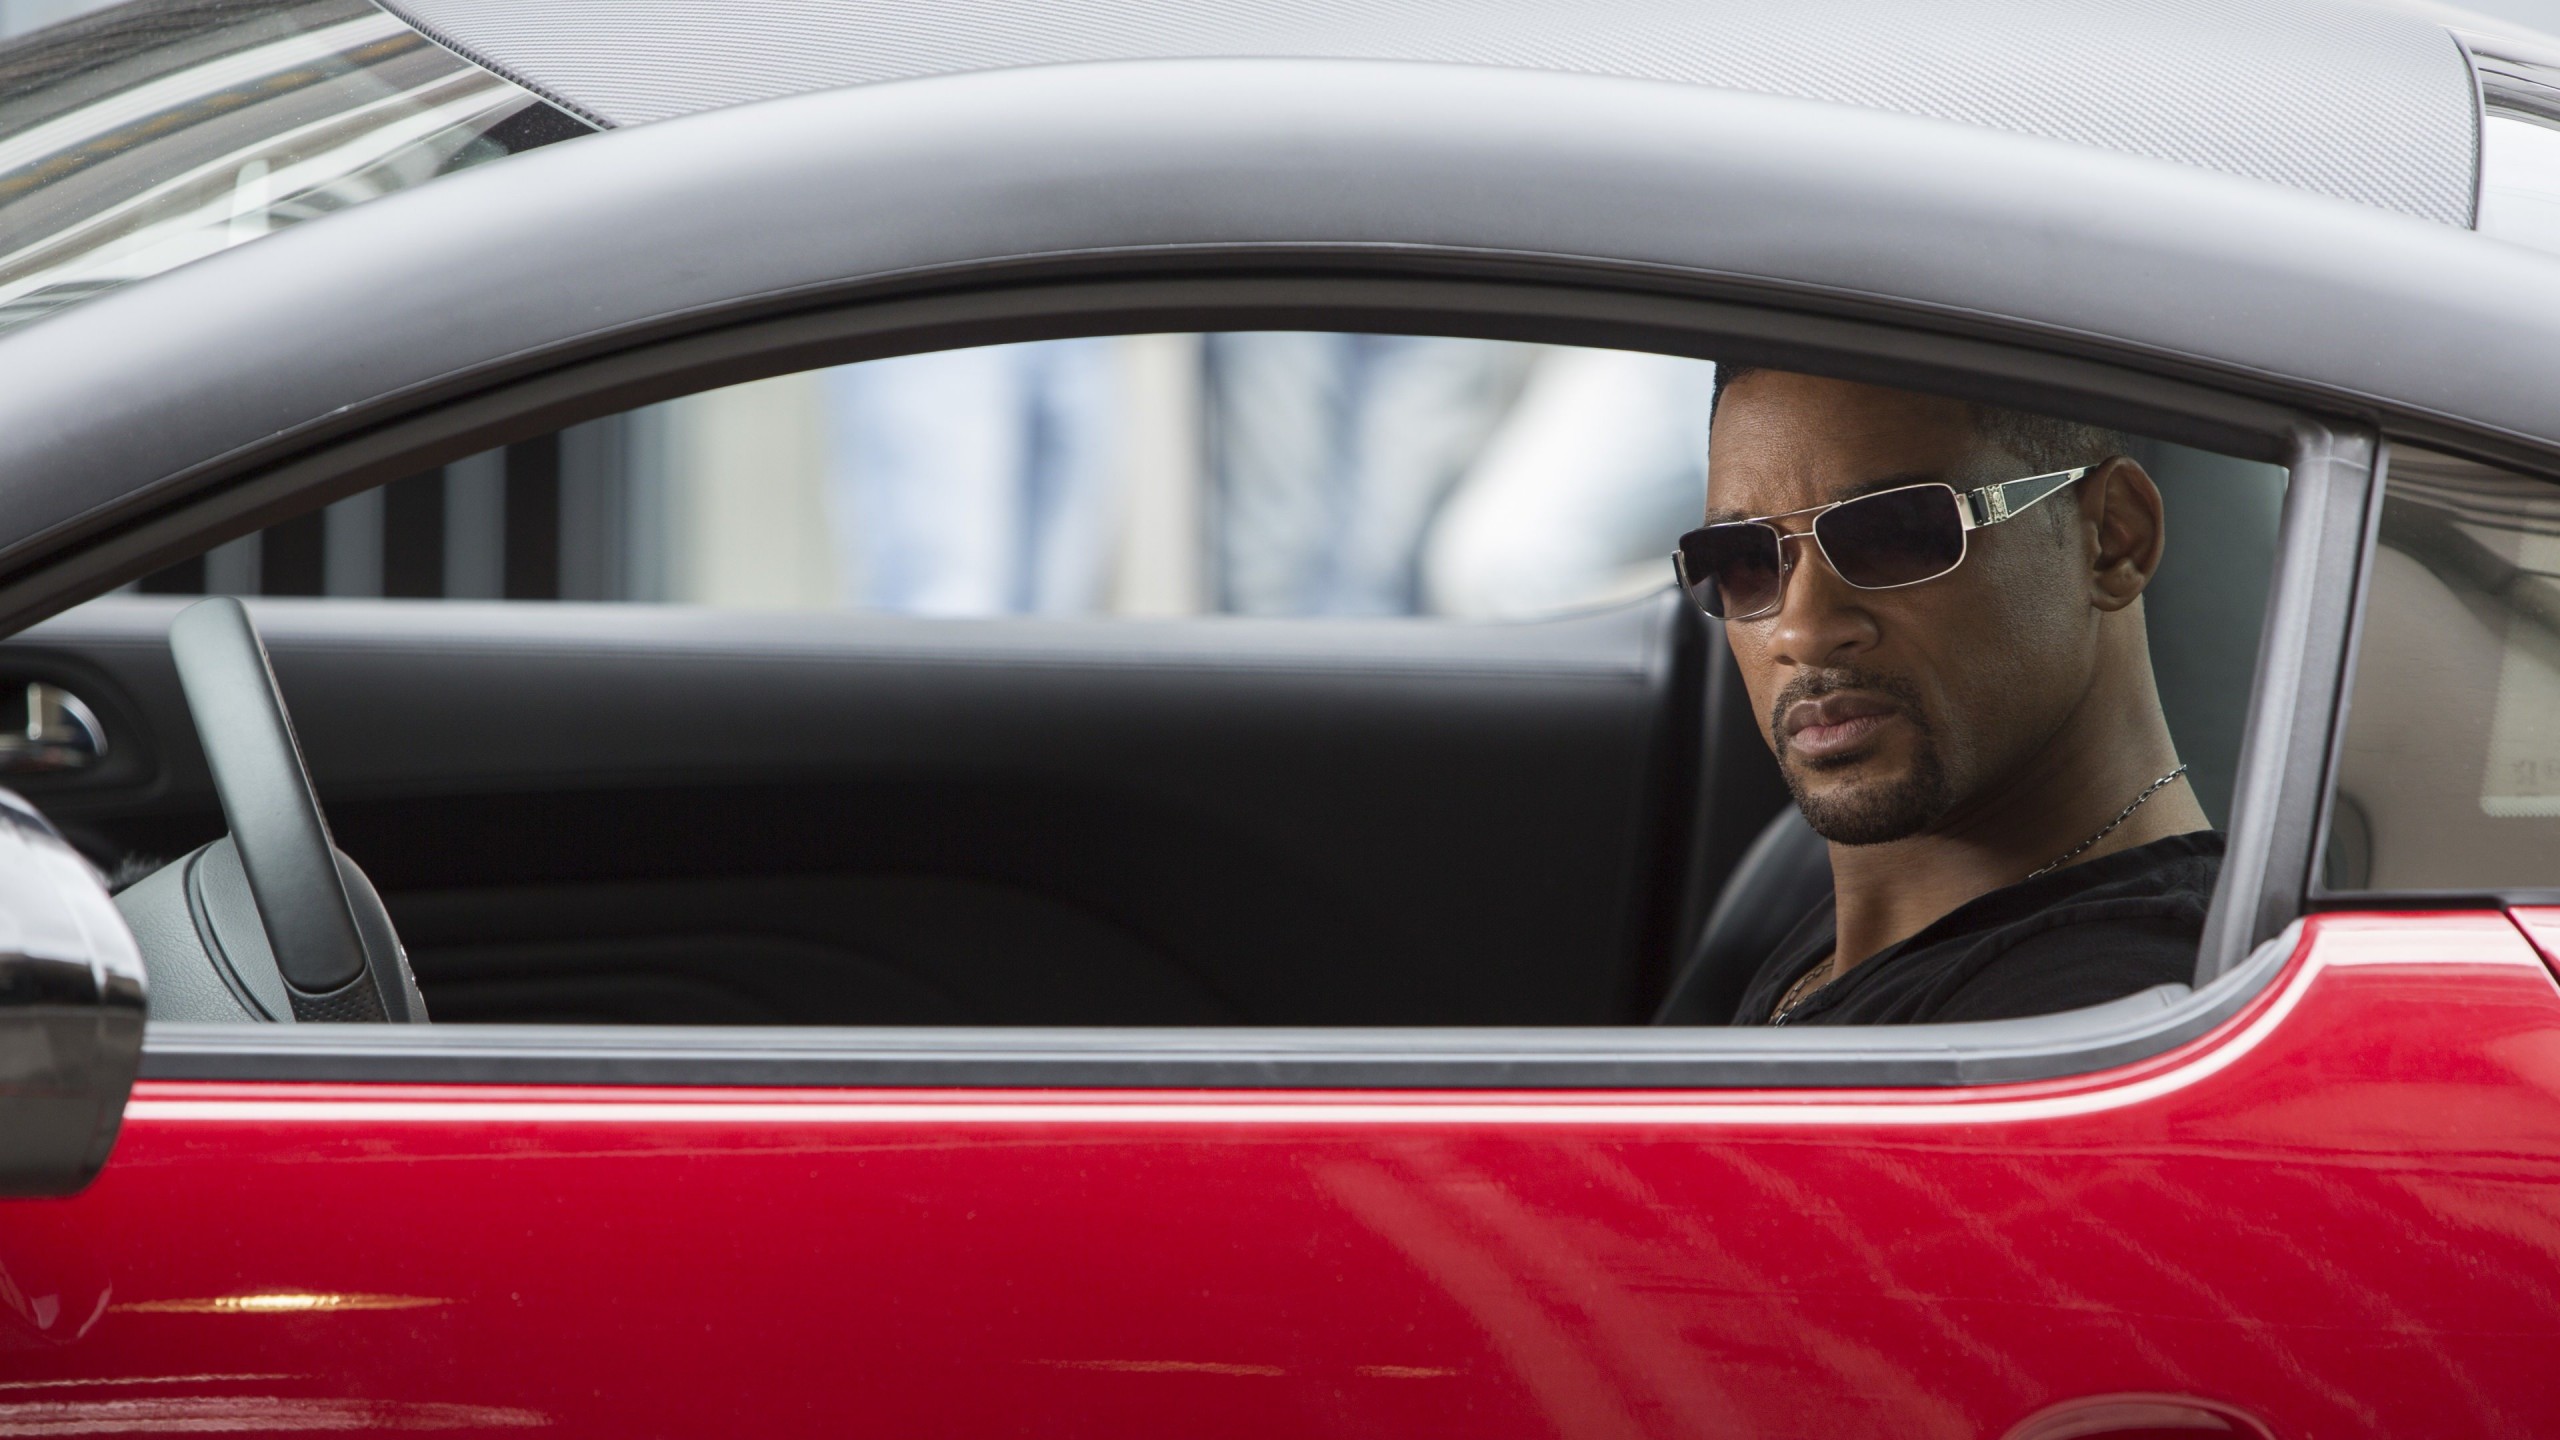 Will Smith at the shooting of "Focus" Wallpaper for Social Media YouTube Channel Art